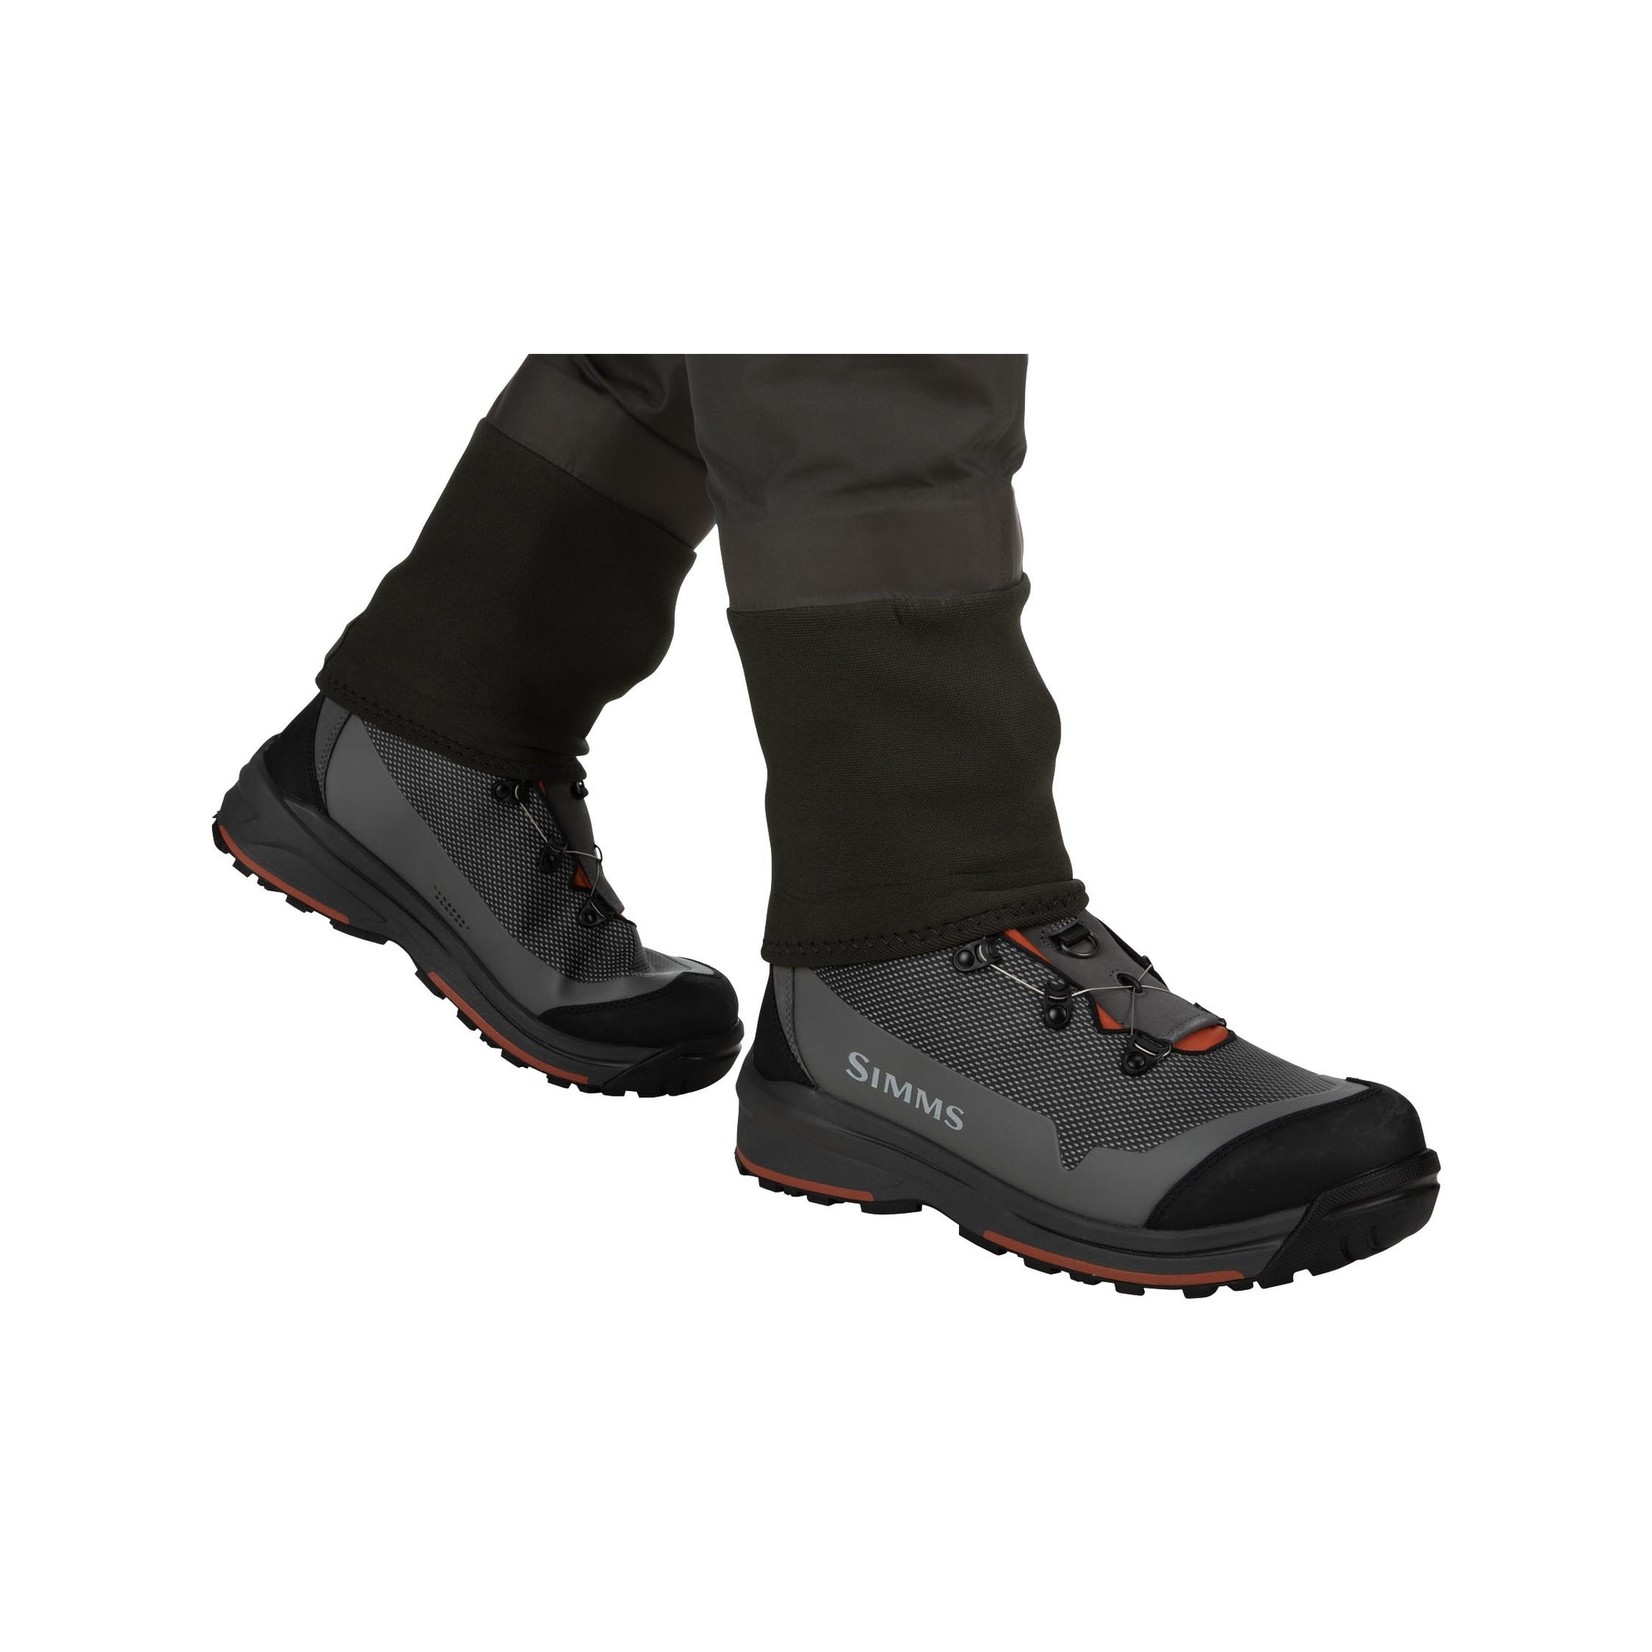 SIMMS G3 GUIDE STOCKING FOOT WADERS